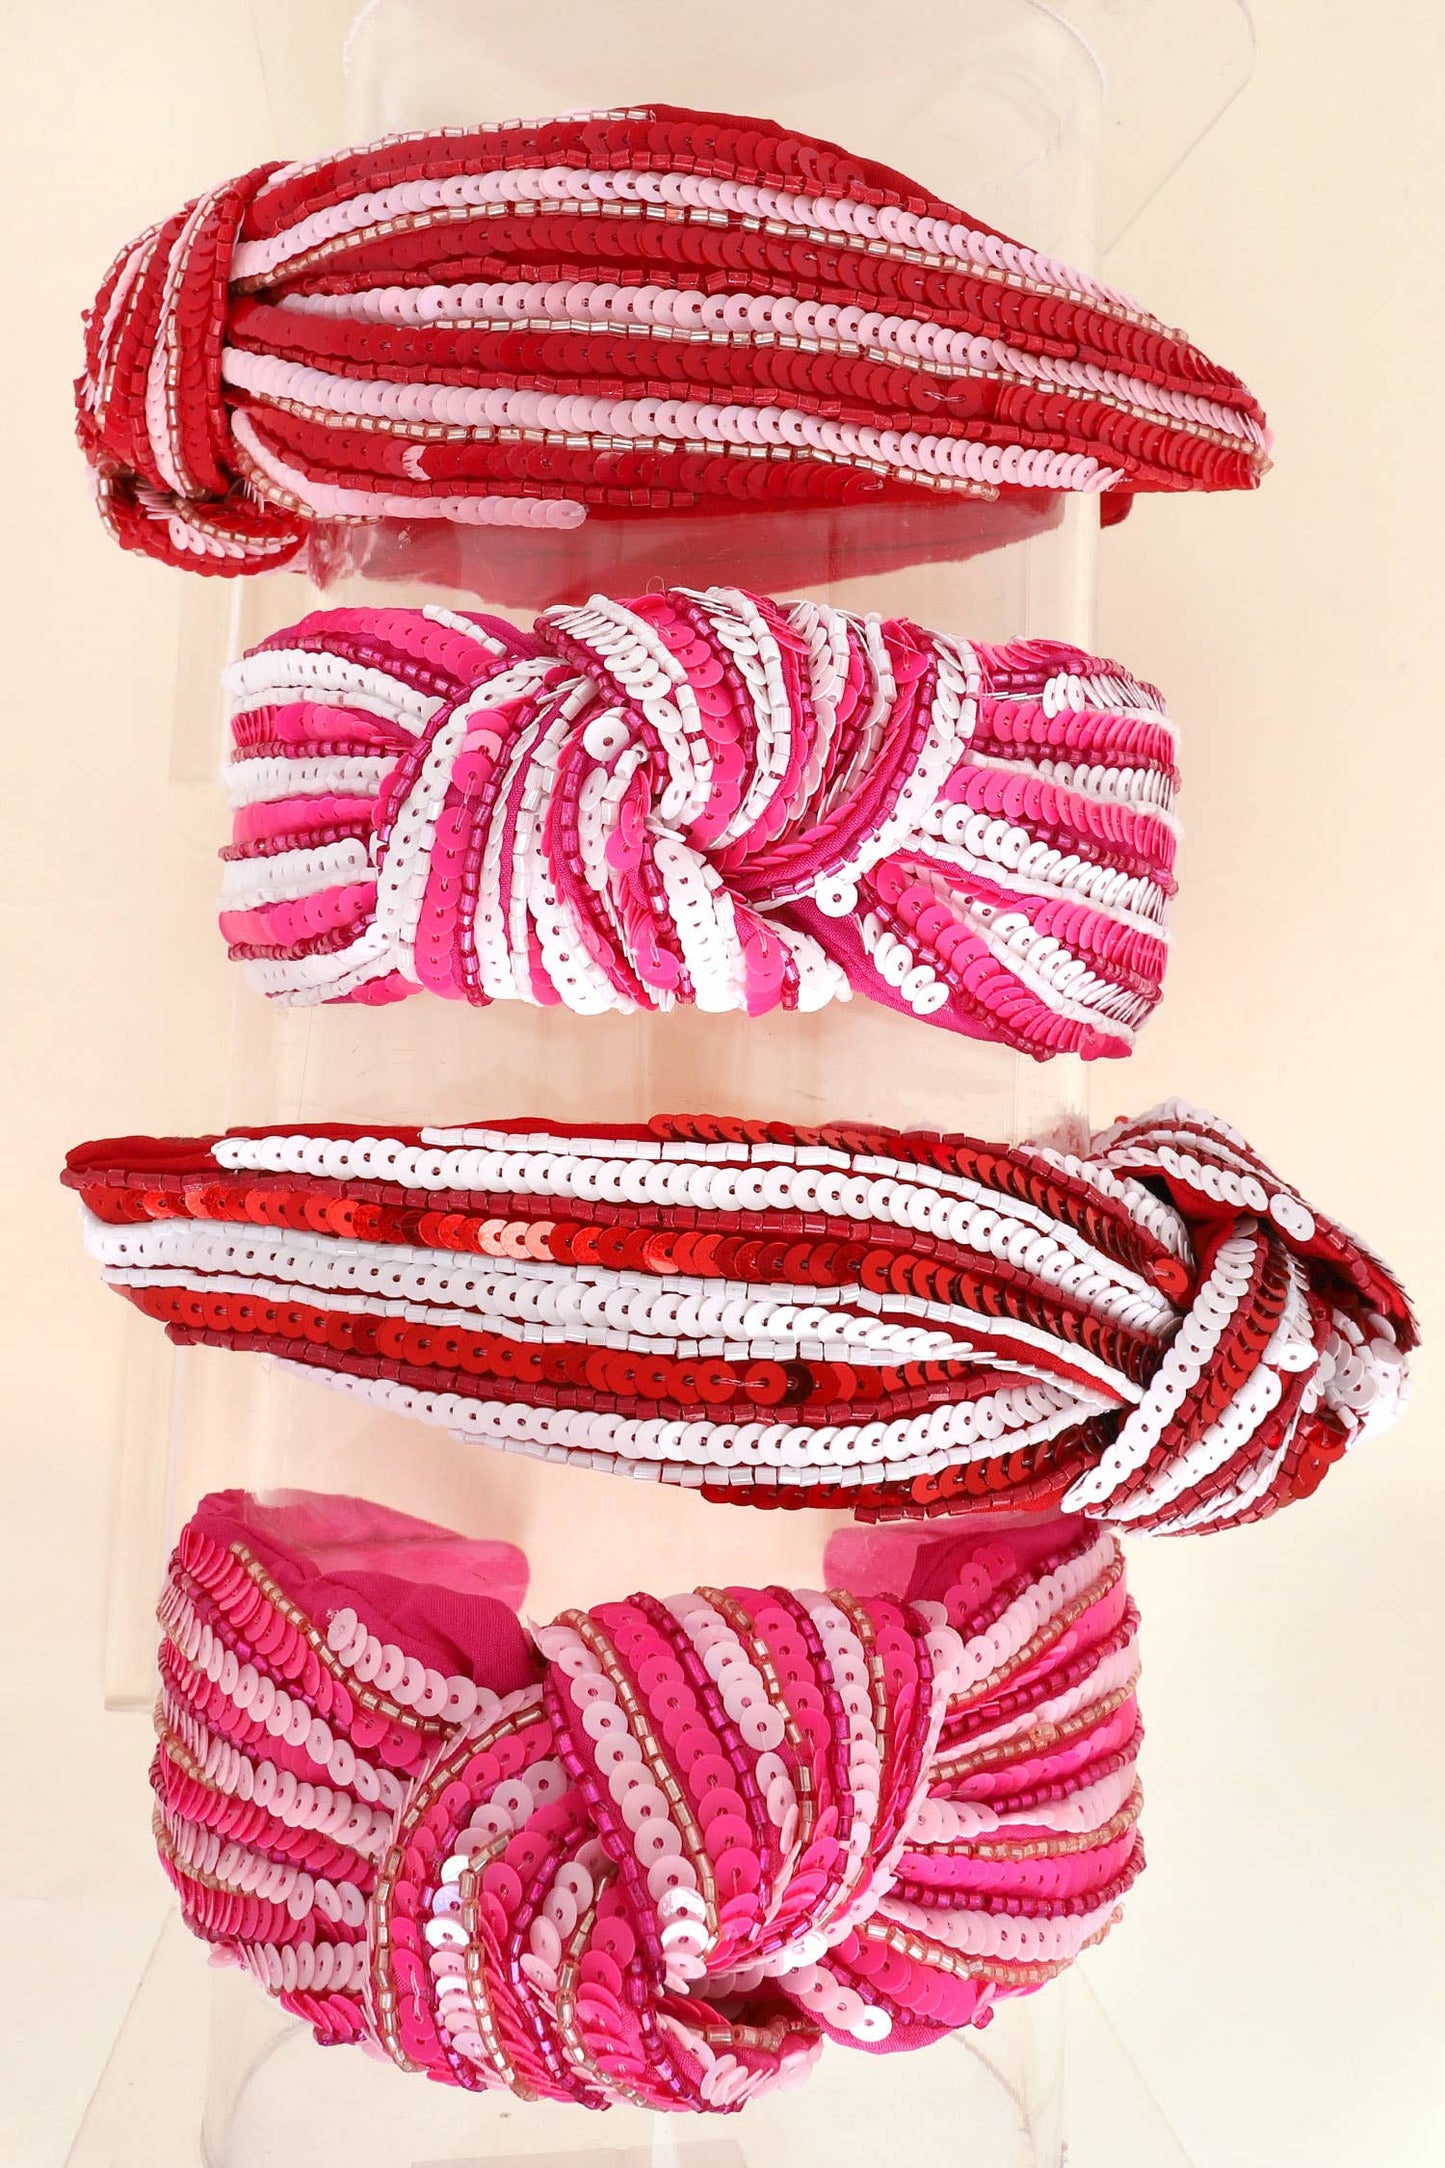 Pink Sequin Striped Top Knotted Embellished Headband